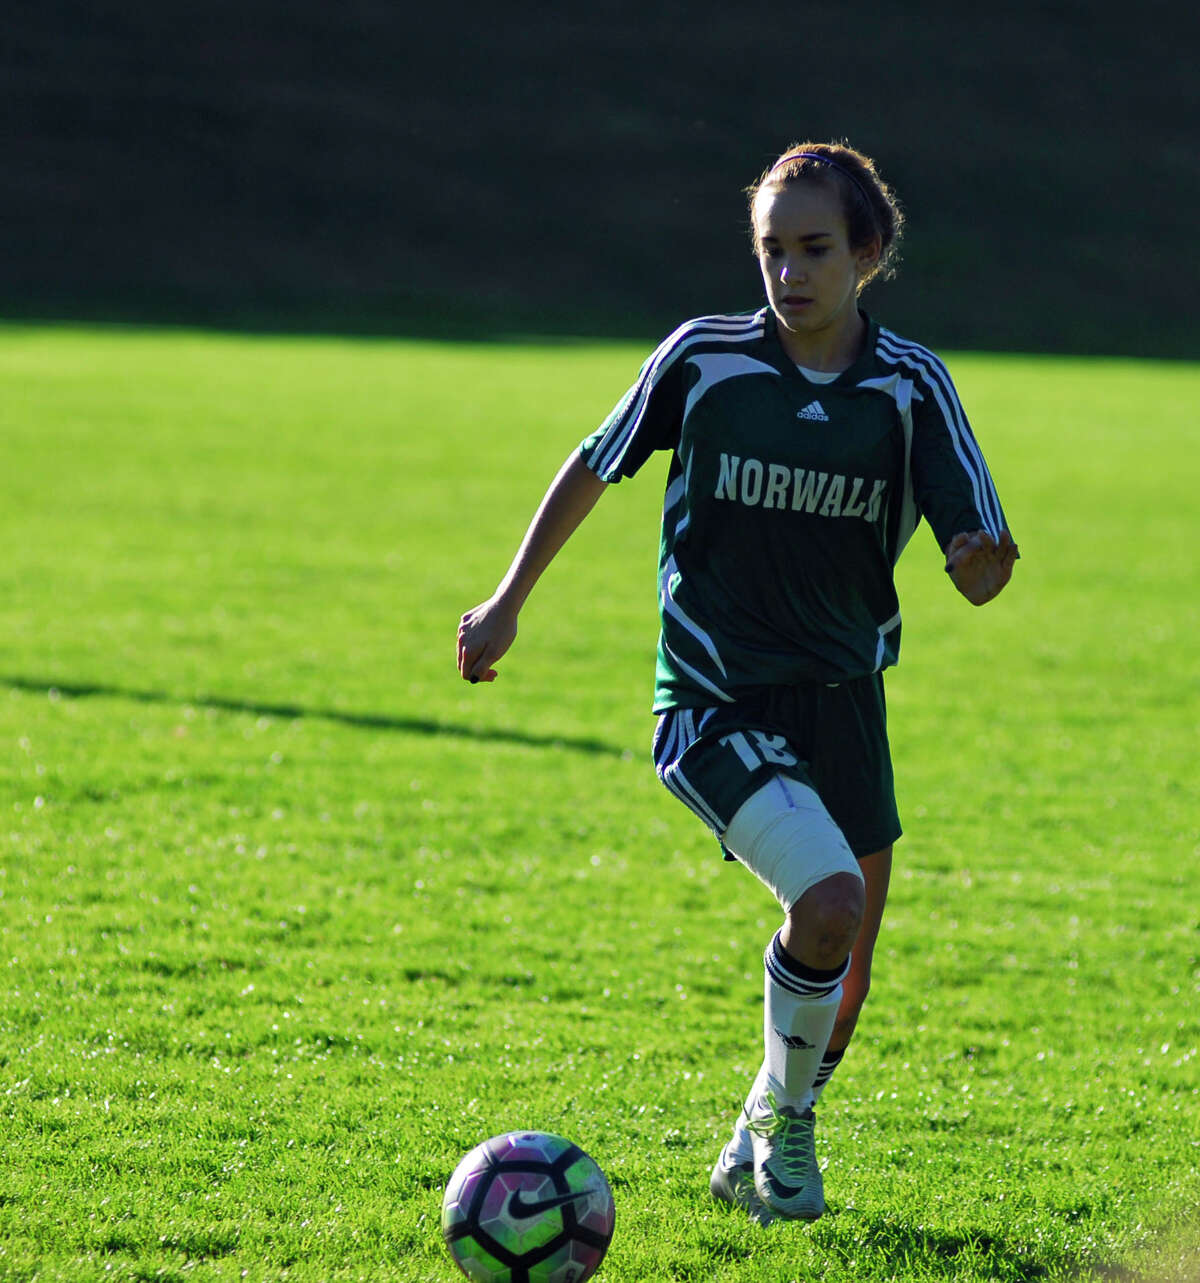 Norwalk's Kaitlyn Troy controls the ball during a girls soccer game against Staples on Tuesday.